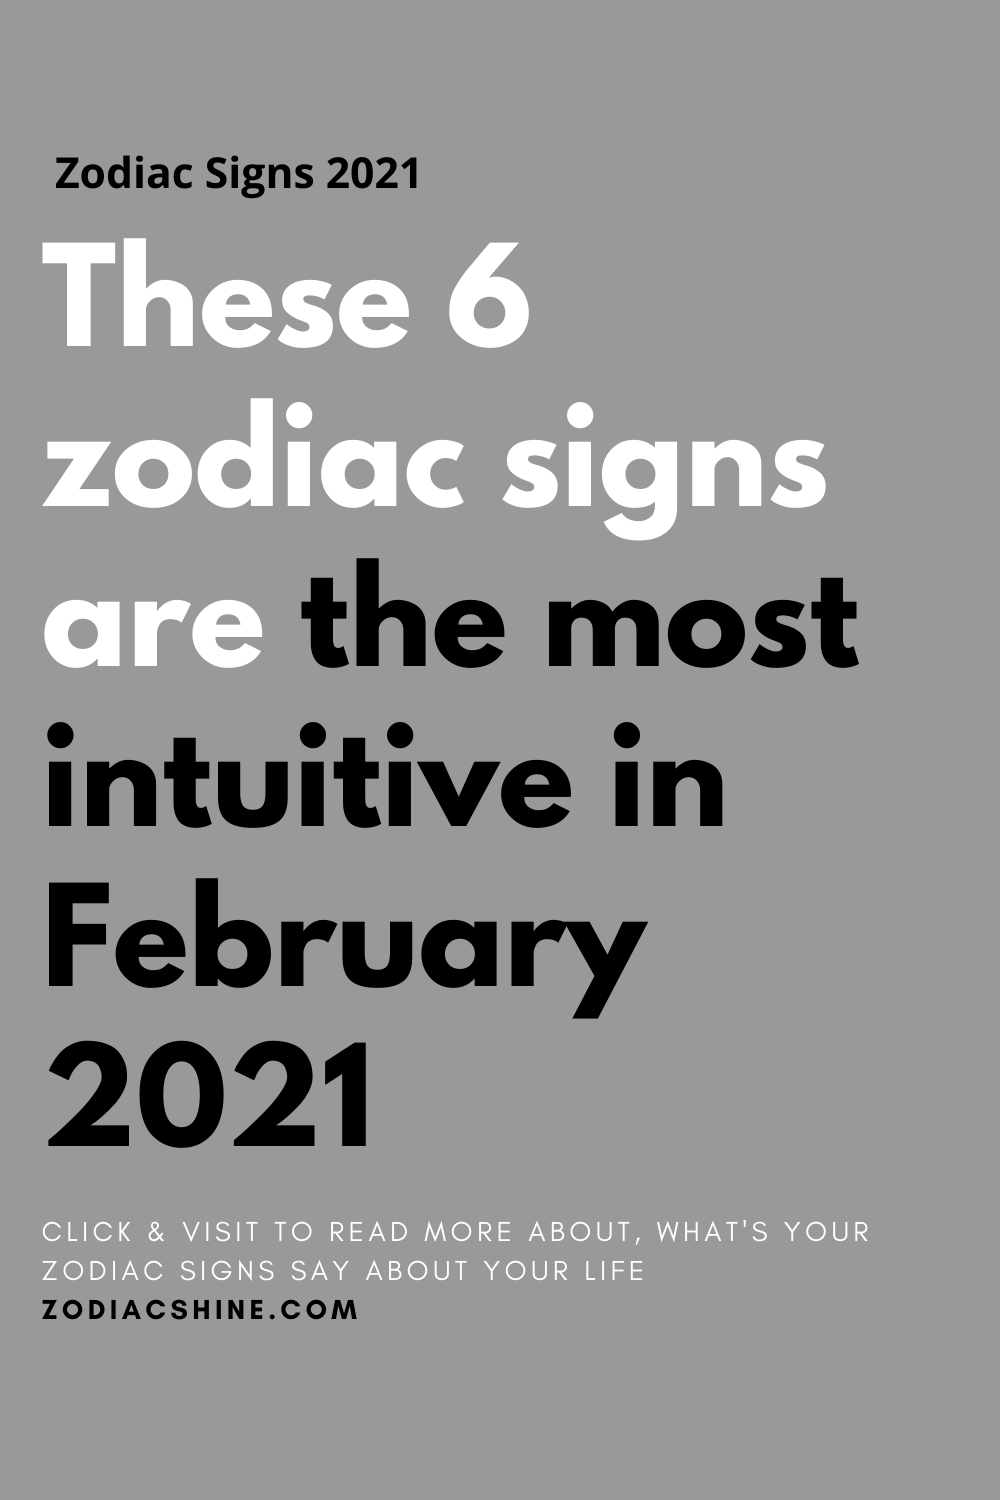 These 6 zodiac signs are the most intuitive in February 2021